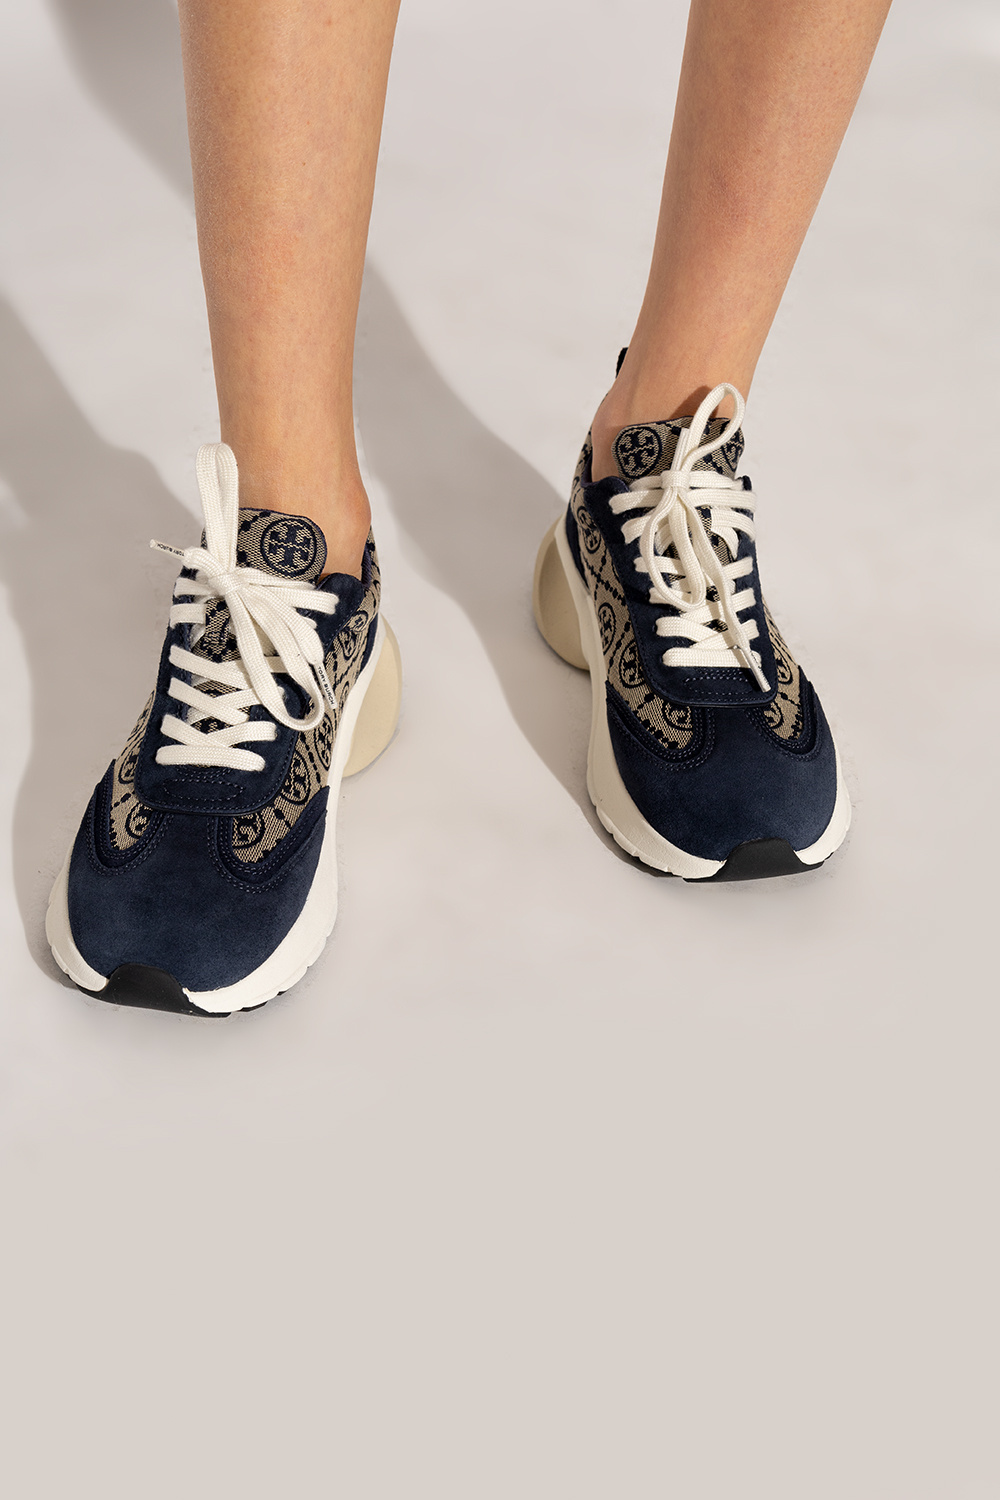 IetpShops Germany - 'T Monogram Good Luck' sneakers Tory Burch - These  casual shoes have a classic brogue styling with Ortholite sock for extra  comfort